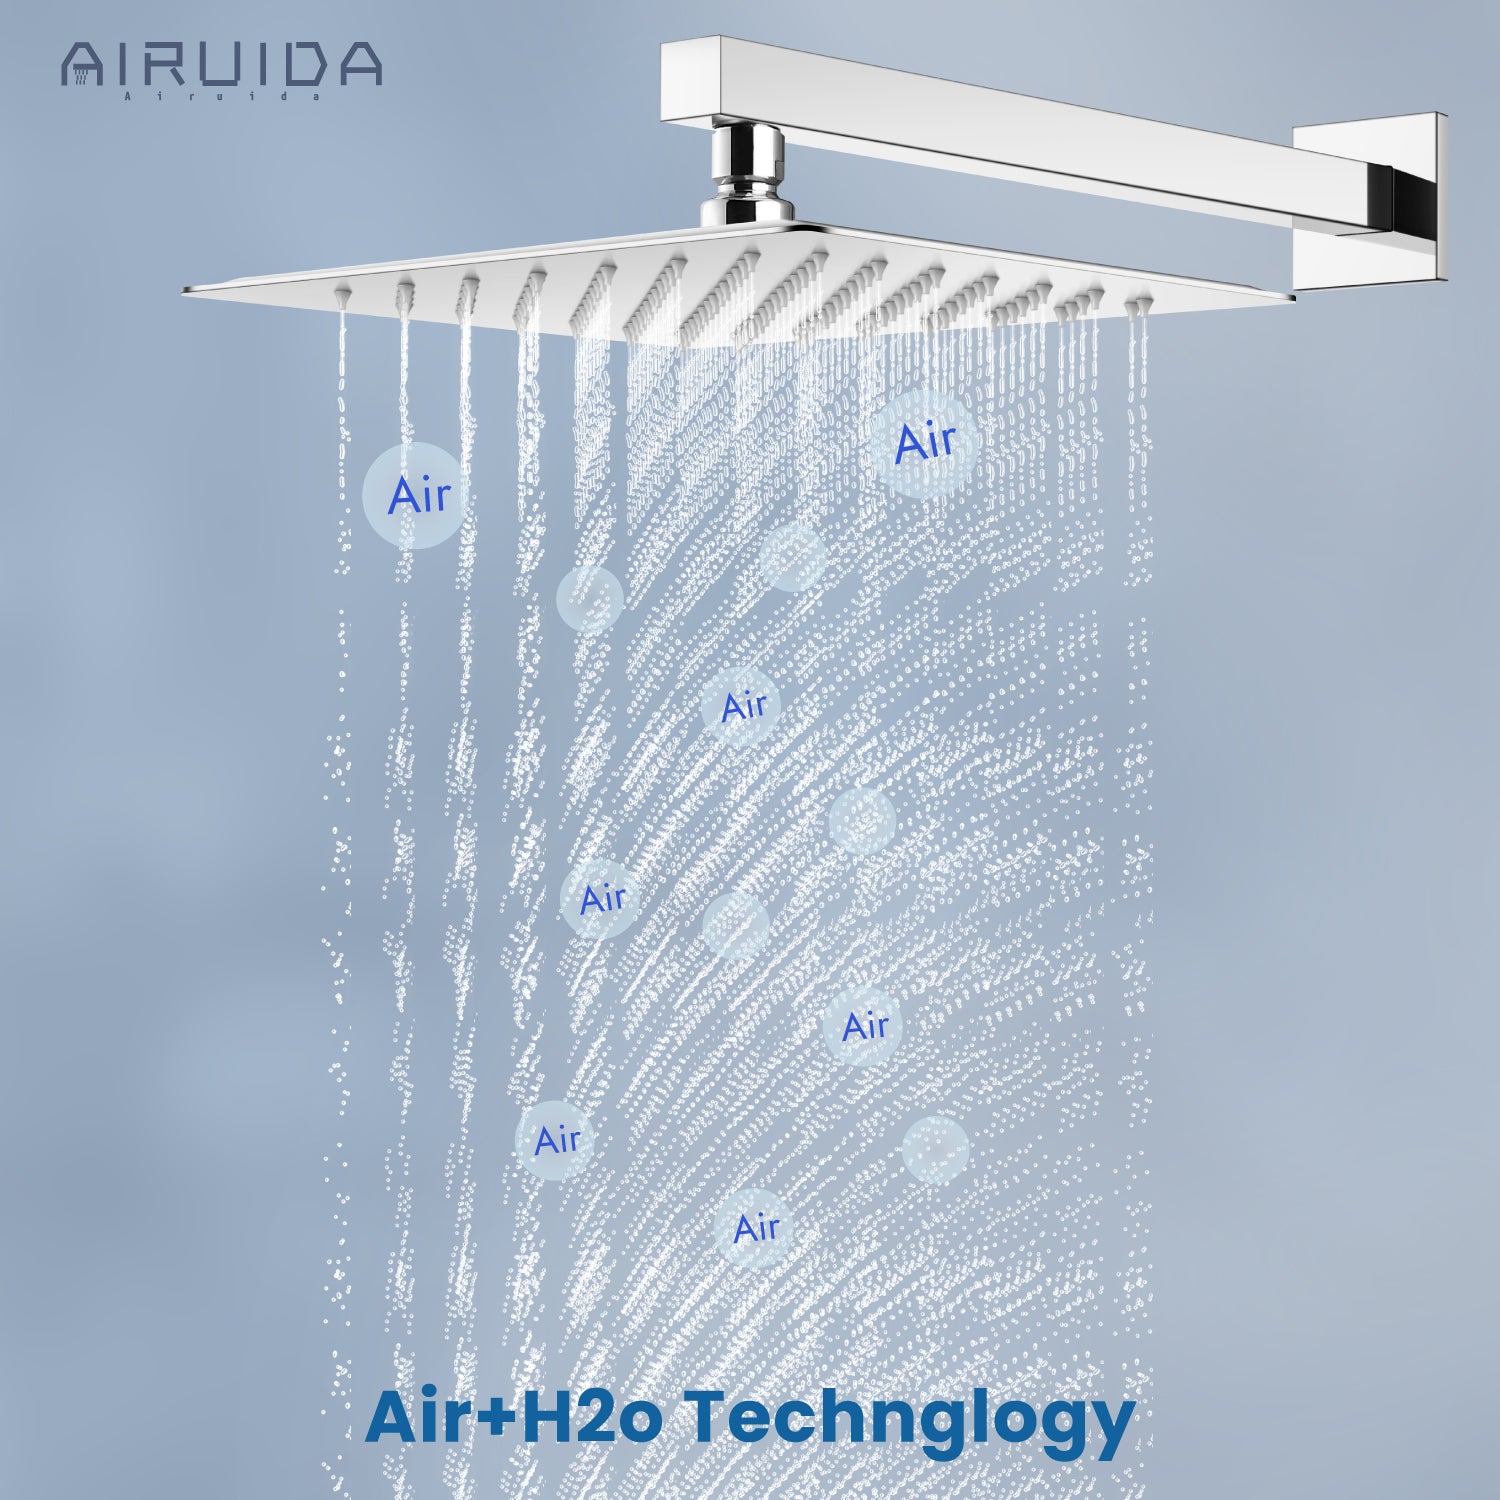 Airuida Shower Faucet Set, Single Function Shower Handle Wall Mount Bathroom Rainfall Shower Mixer, Square 10 Inch Shower Head Shower Valve and Trim Kit with Female Thread Rough-in Valve